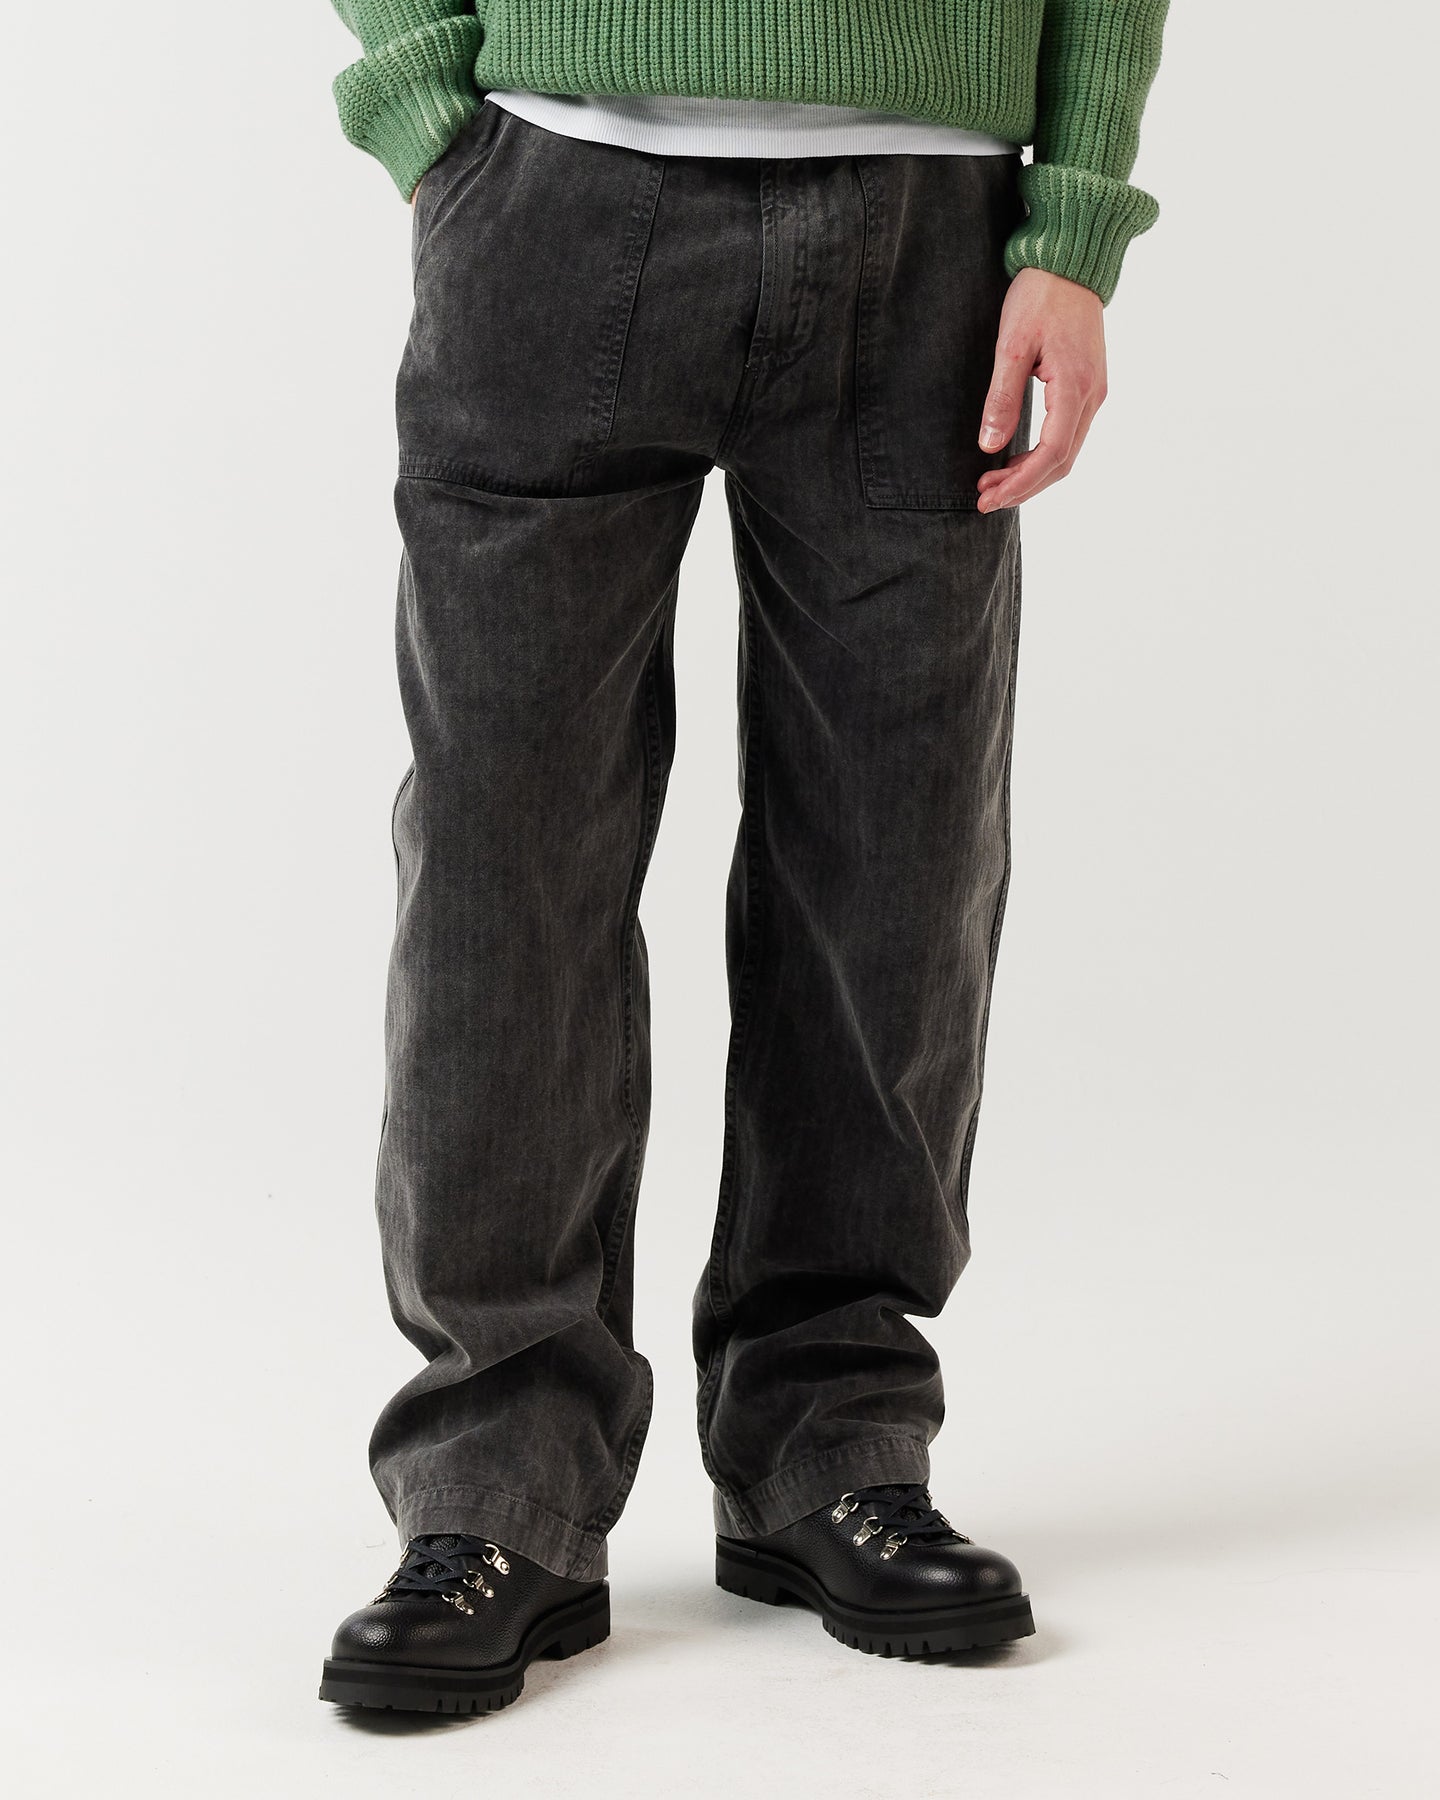 Everyday Fatigue Pant - Washed Black – RONNING